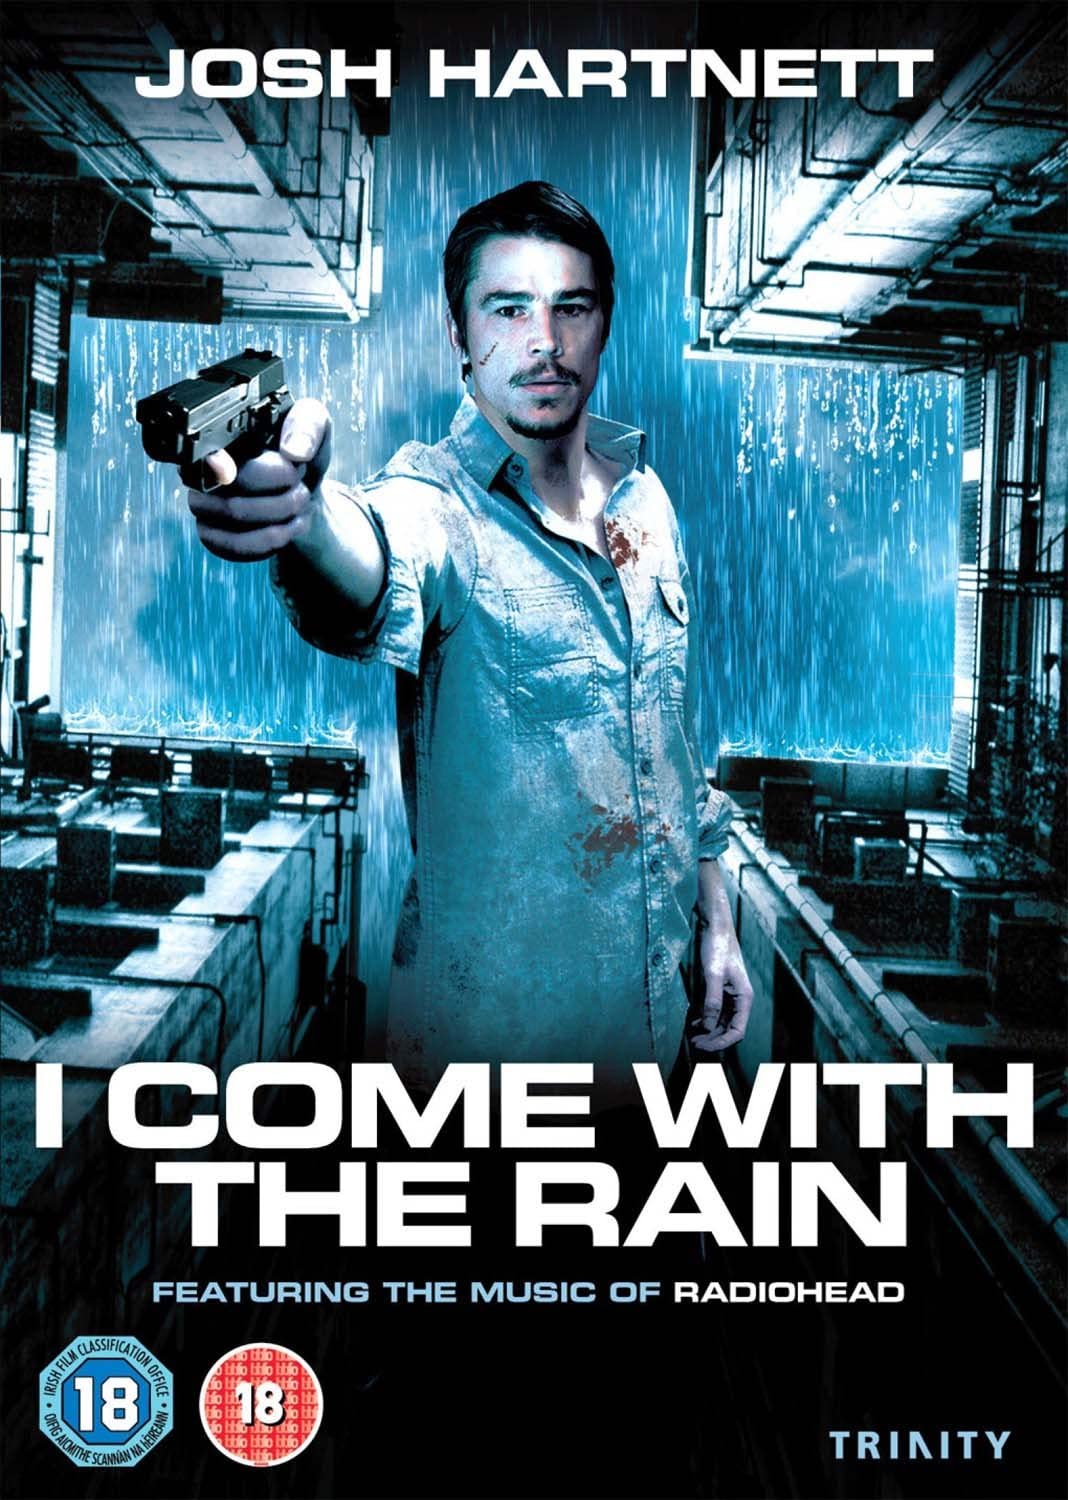 I Come With The Rain (2008) - Thriller [DVD]